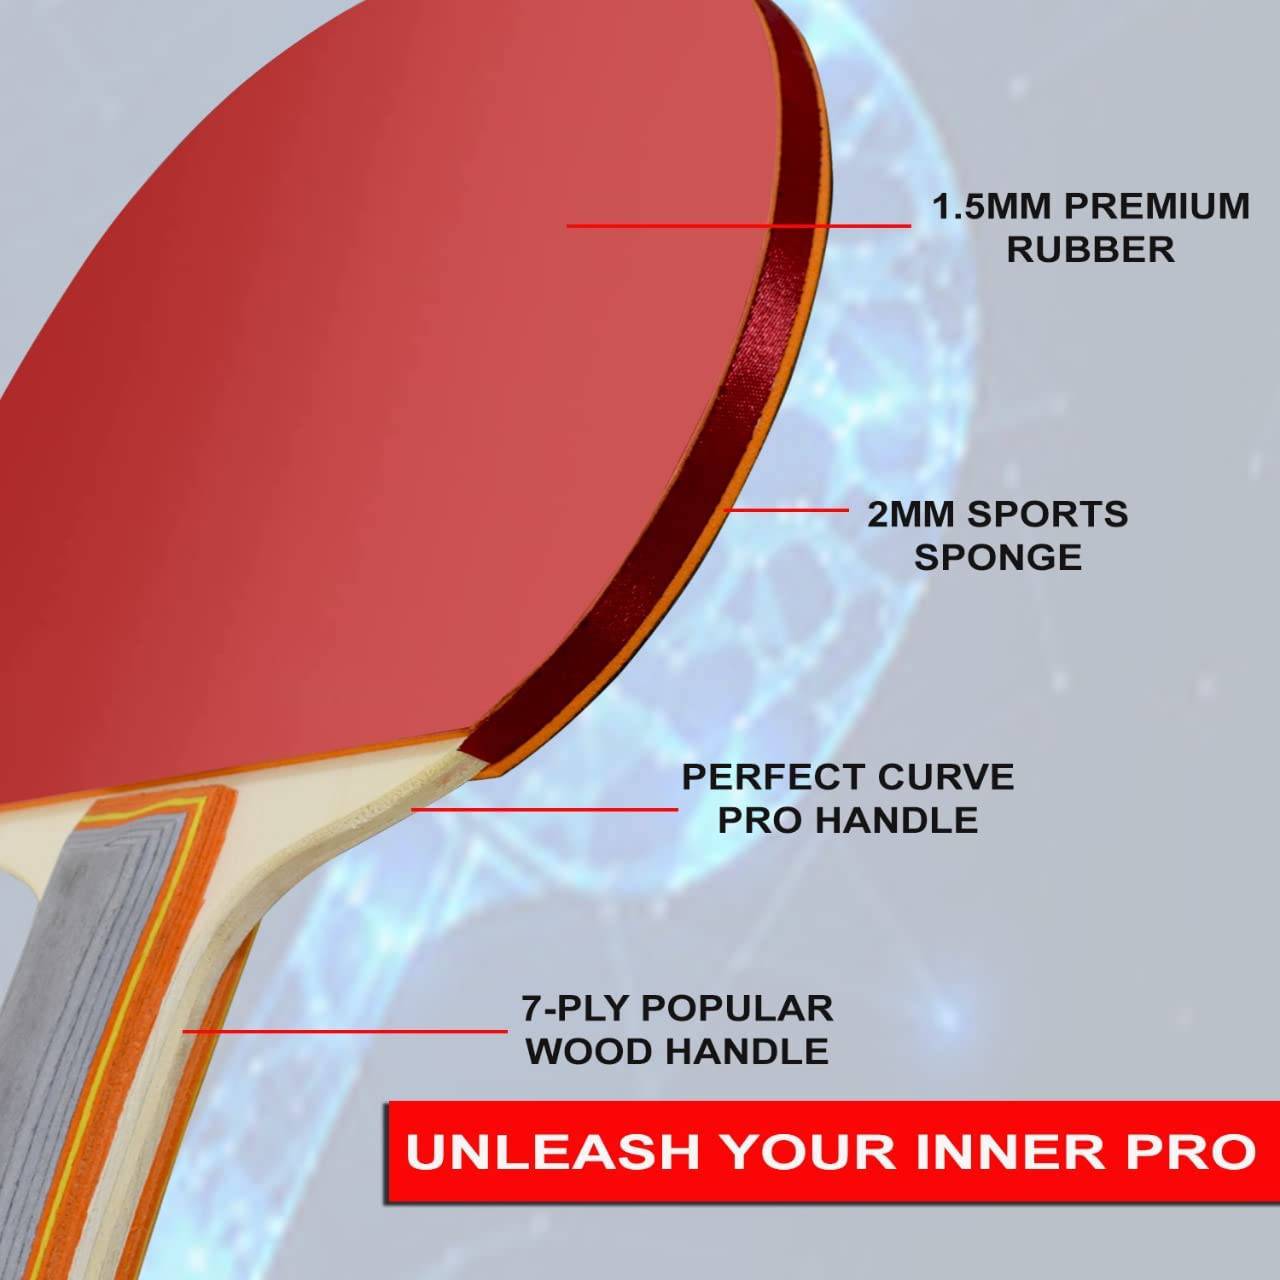 Professional Table Tennis Racquet Set Including 2 Ping Pong Rackets and 3 Balls,EM-9350 Skyland - COOL BABY